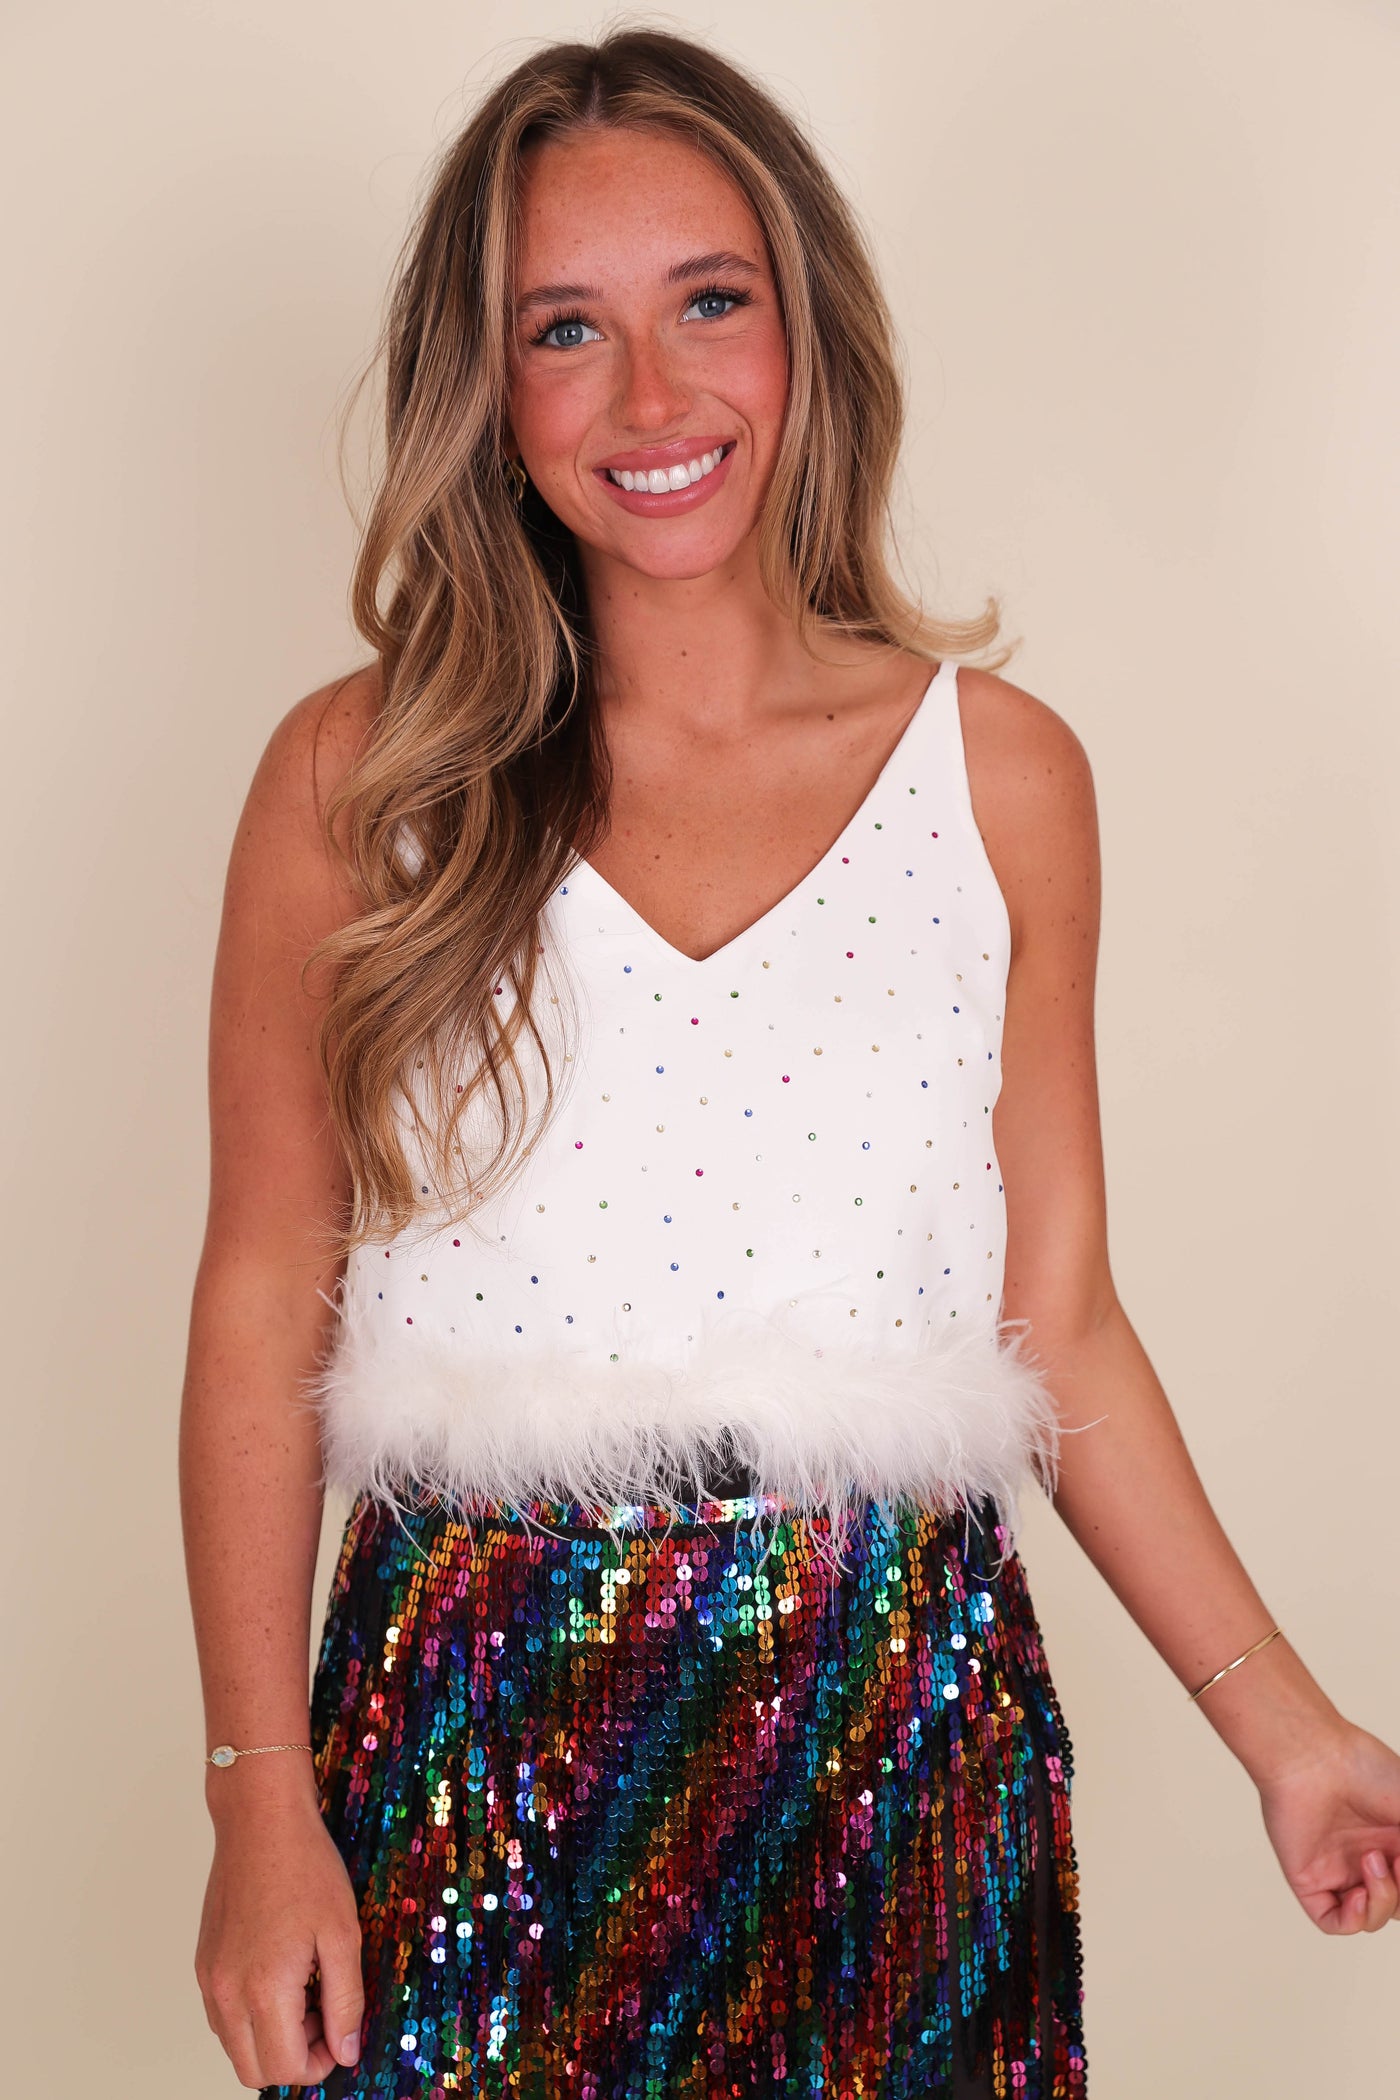 Women's Sequin Feather Tank- Women's Cropped Rhinestone Top- Women's Feather and Rhinestone Tank